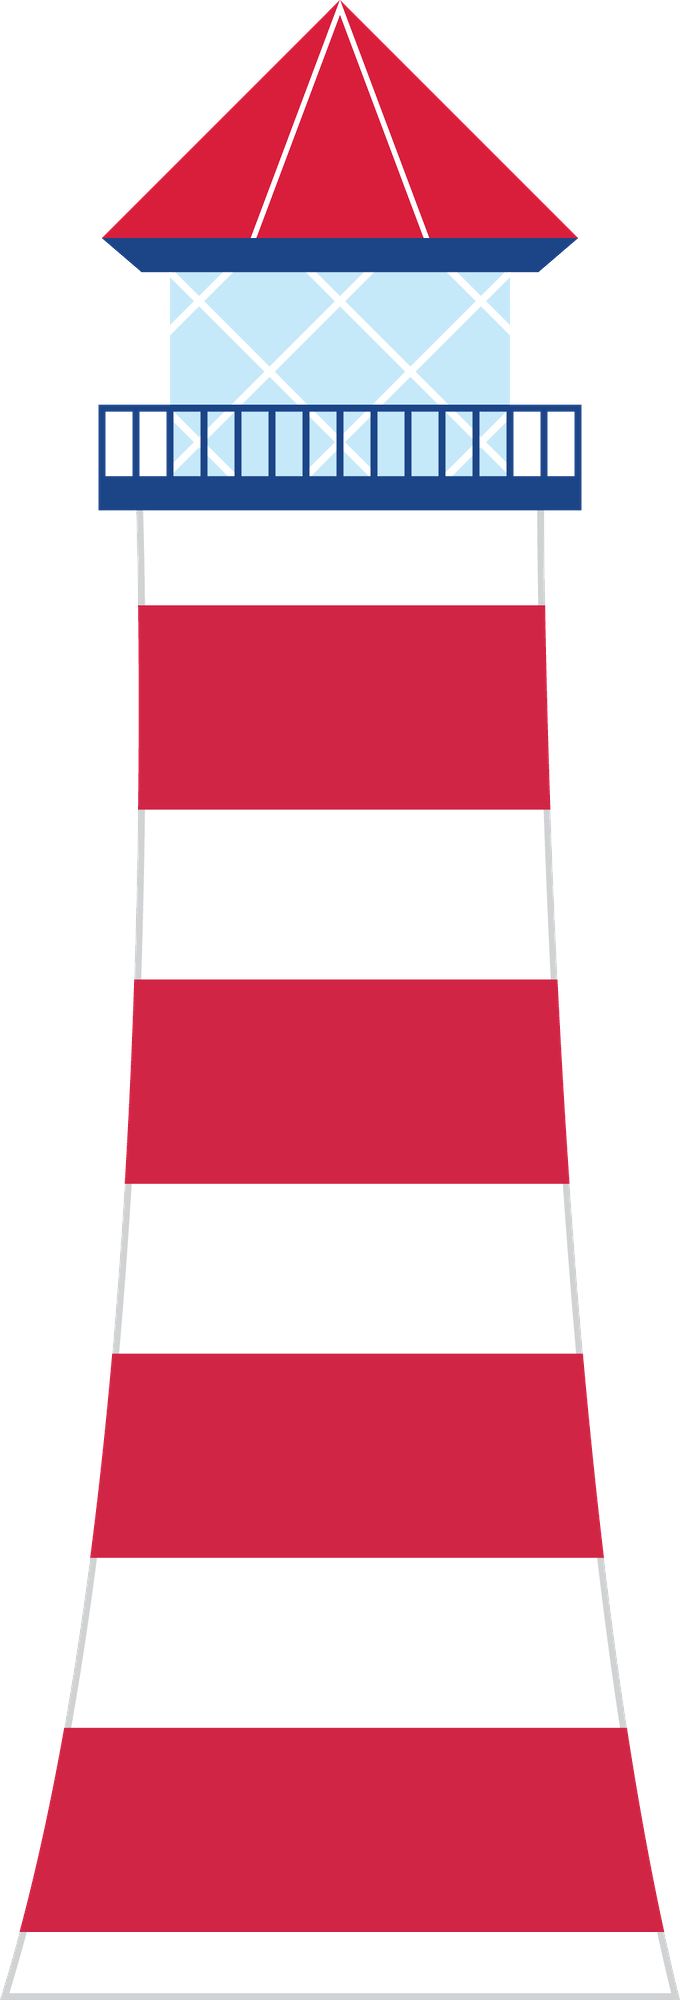 clipart lighthouse pictures - photo #28